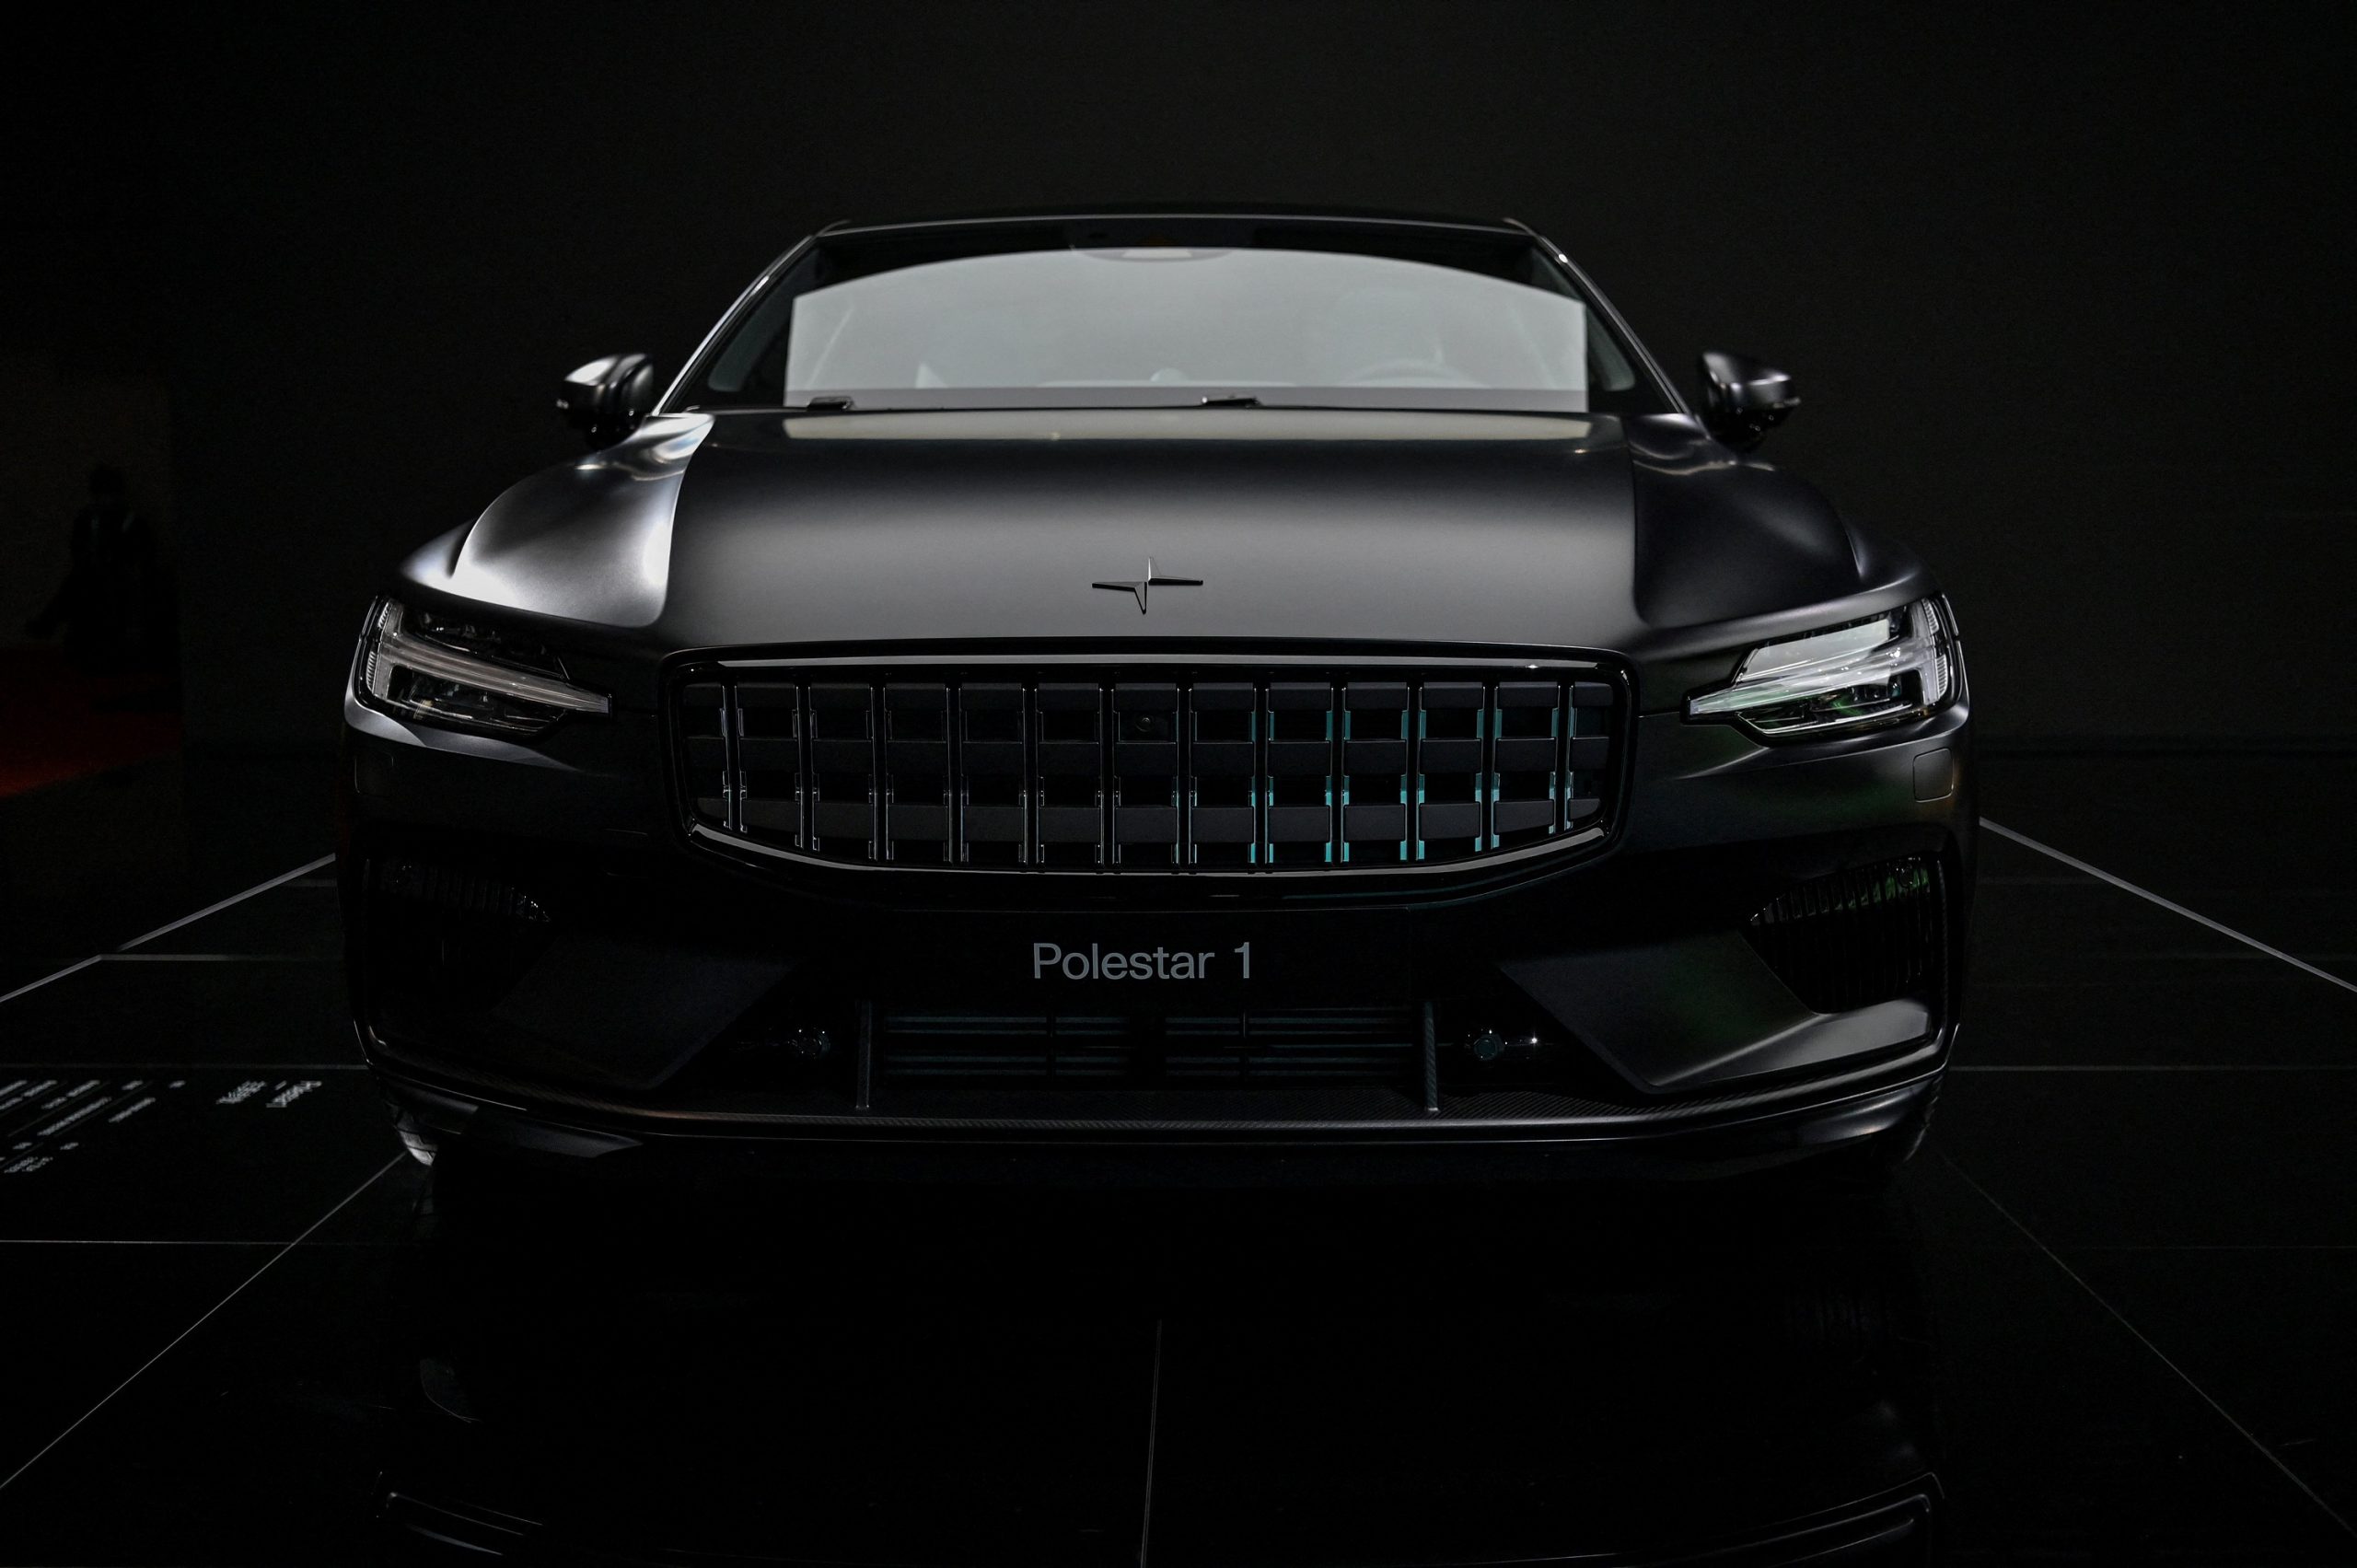 A black Polestar 1 seen in a dark photo booth shot from the front